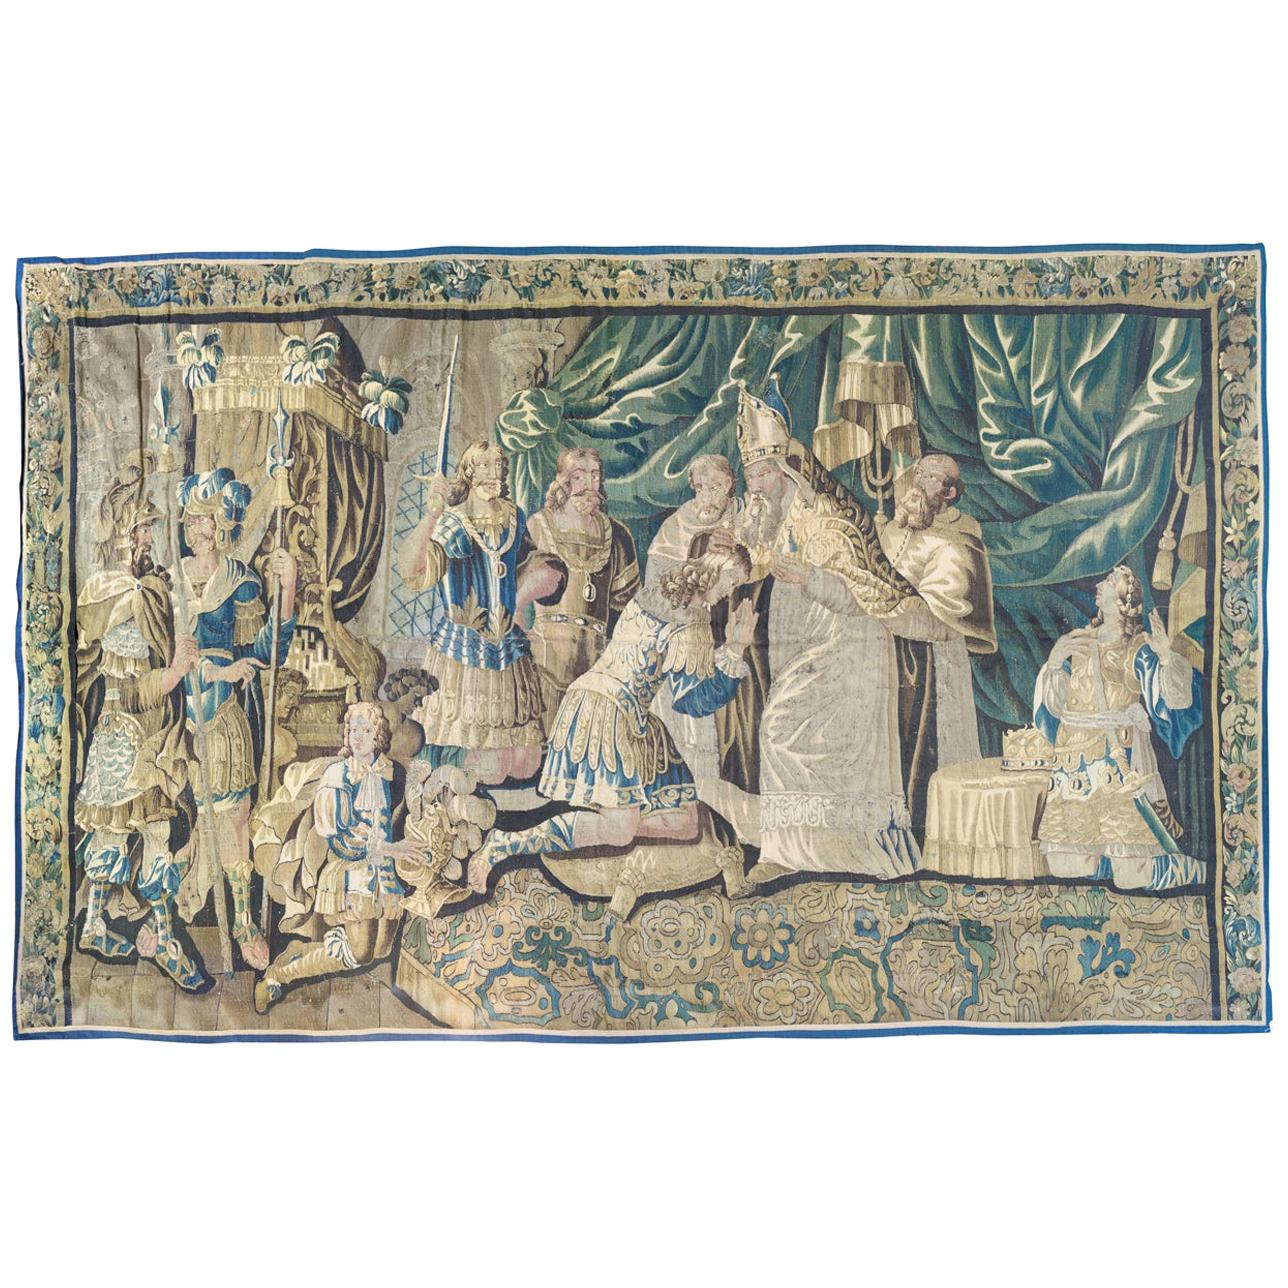 Large Antique 17th Century Brussels Religious Tapestry